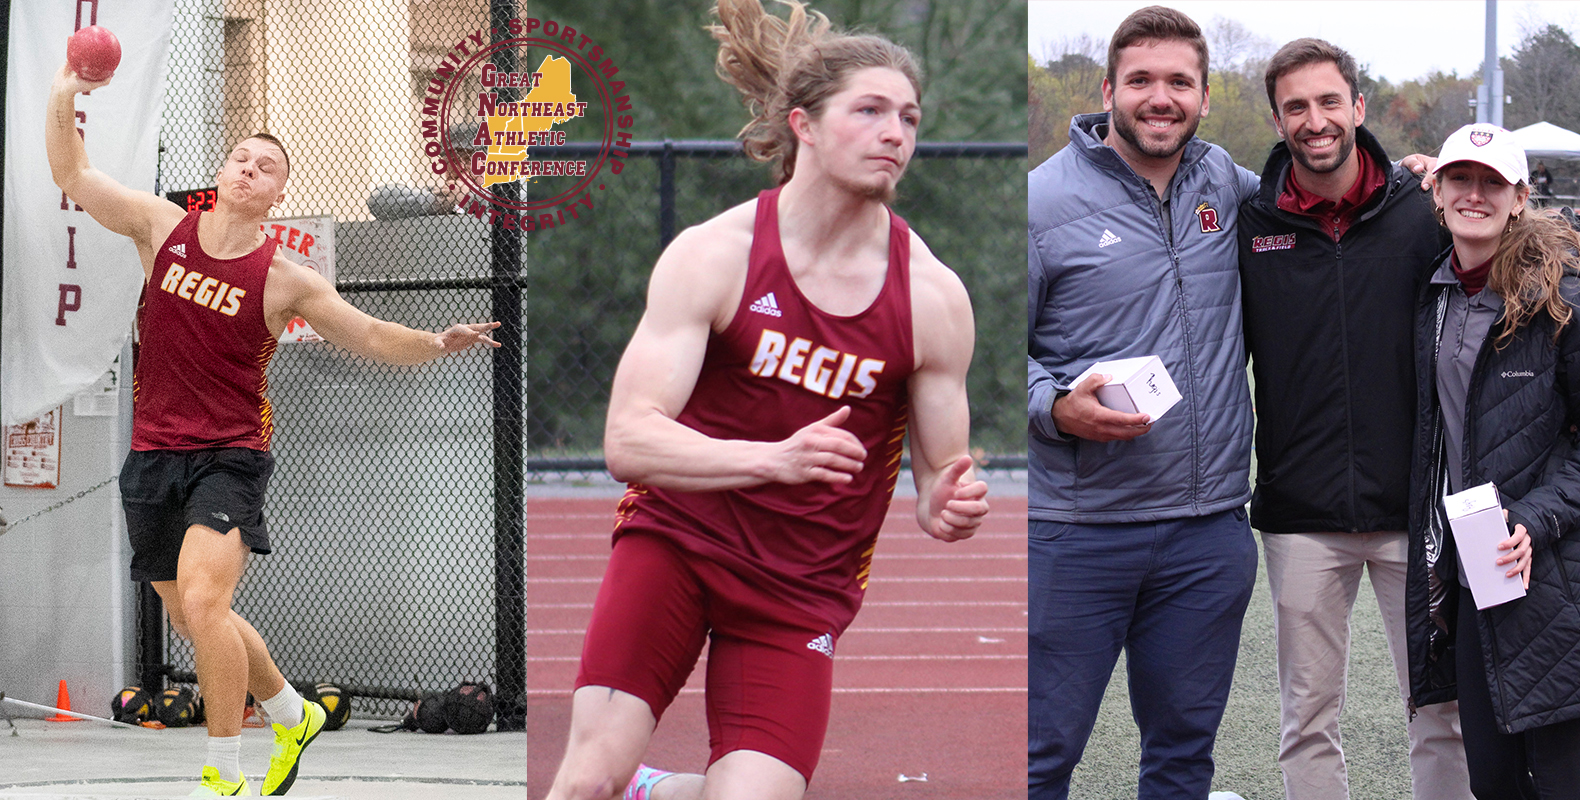 Kalinowski, Thuotte Selected for GNAC Outdoor Track & Field Major Awards